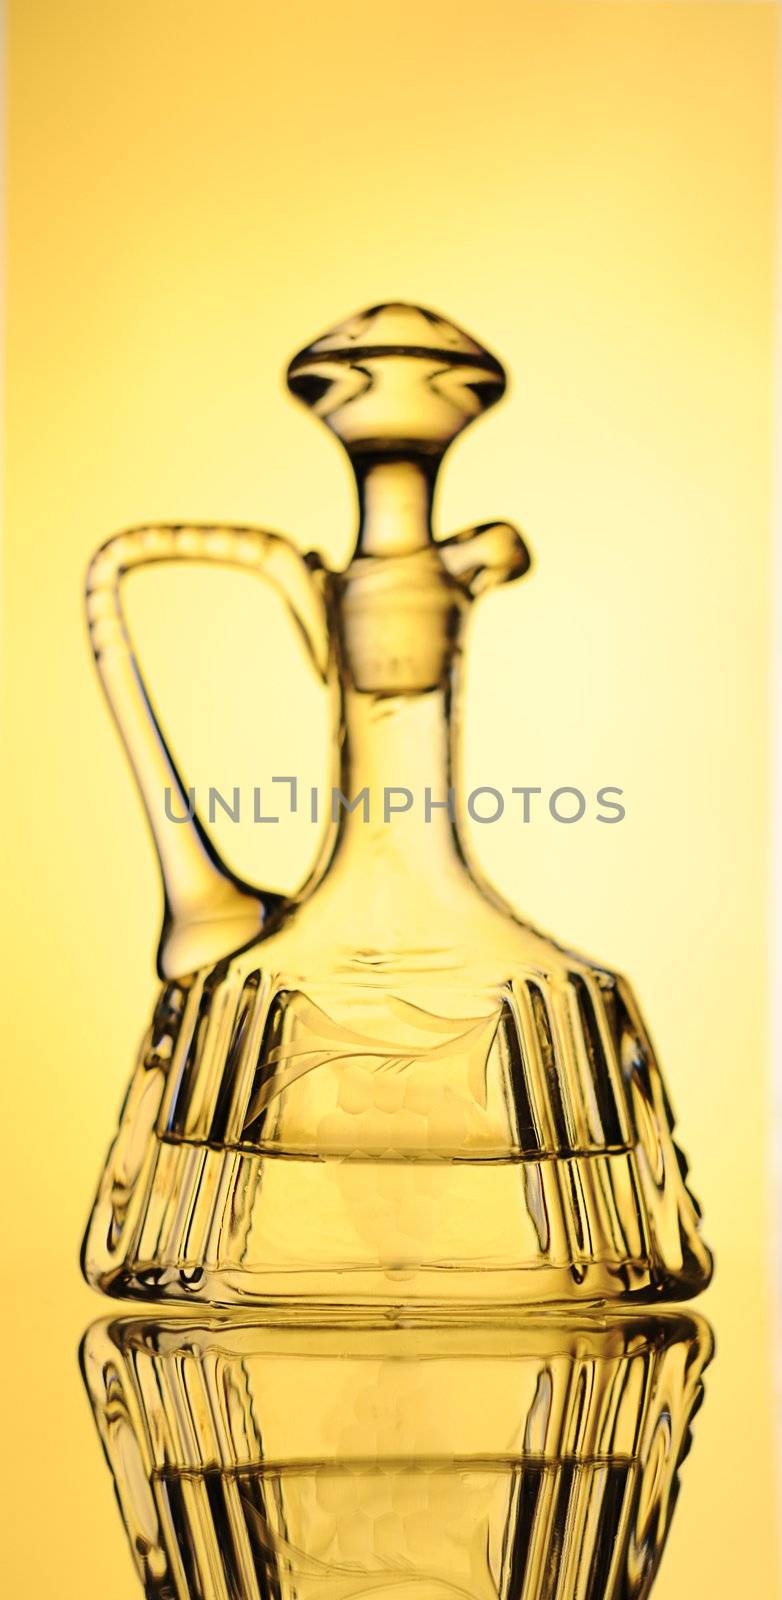 Elegant Crystal Decanter With Vodka Over Yellow  Background.